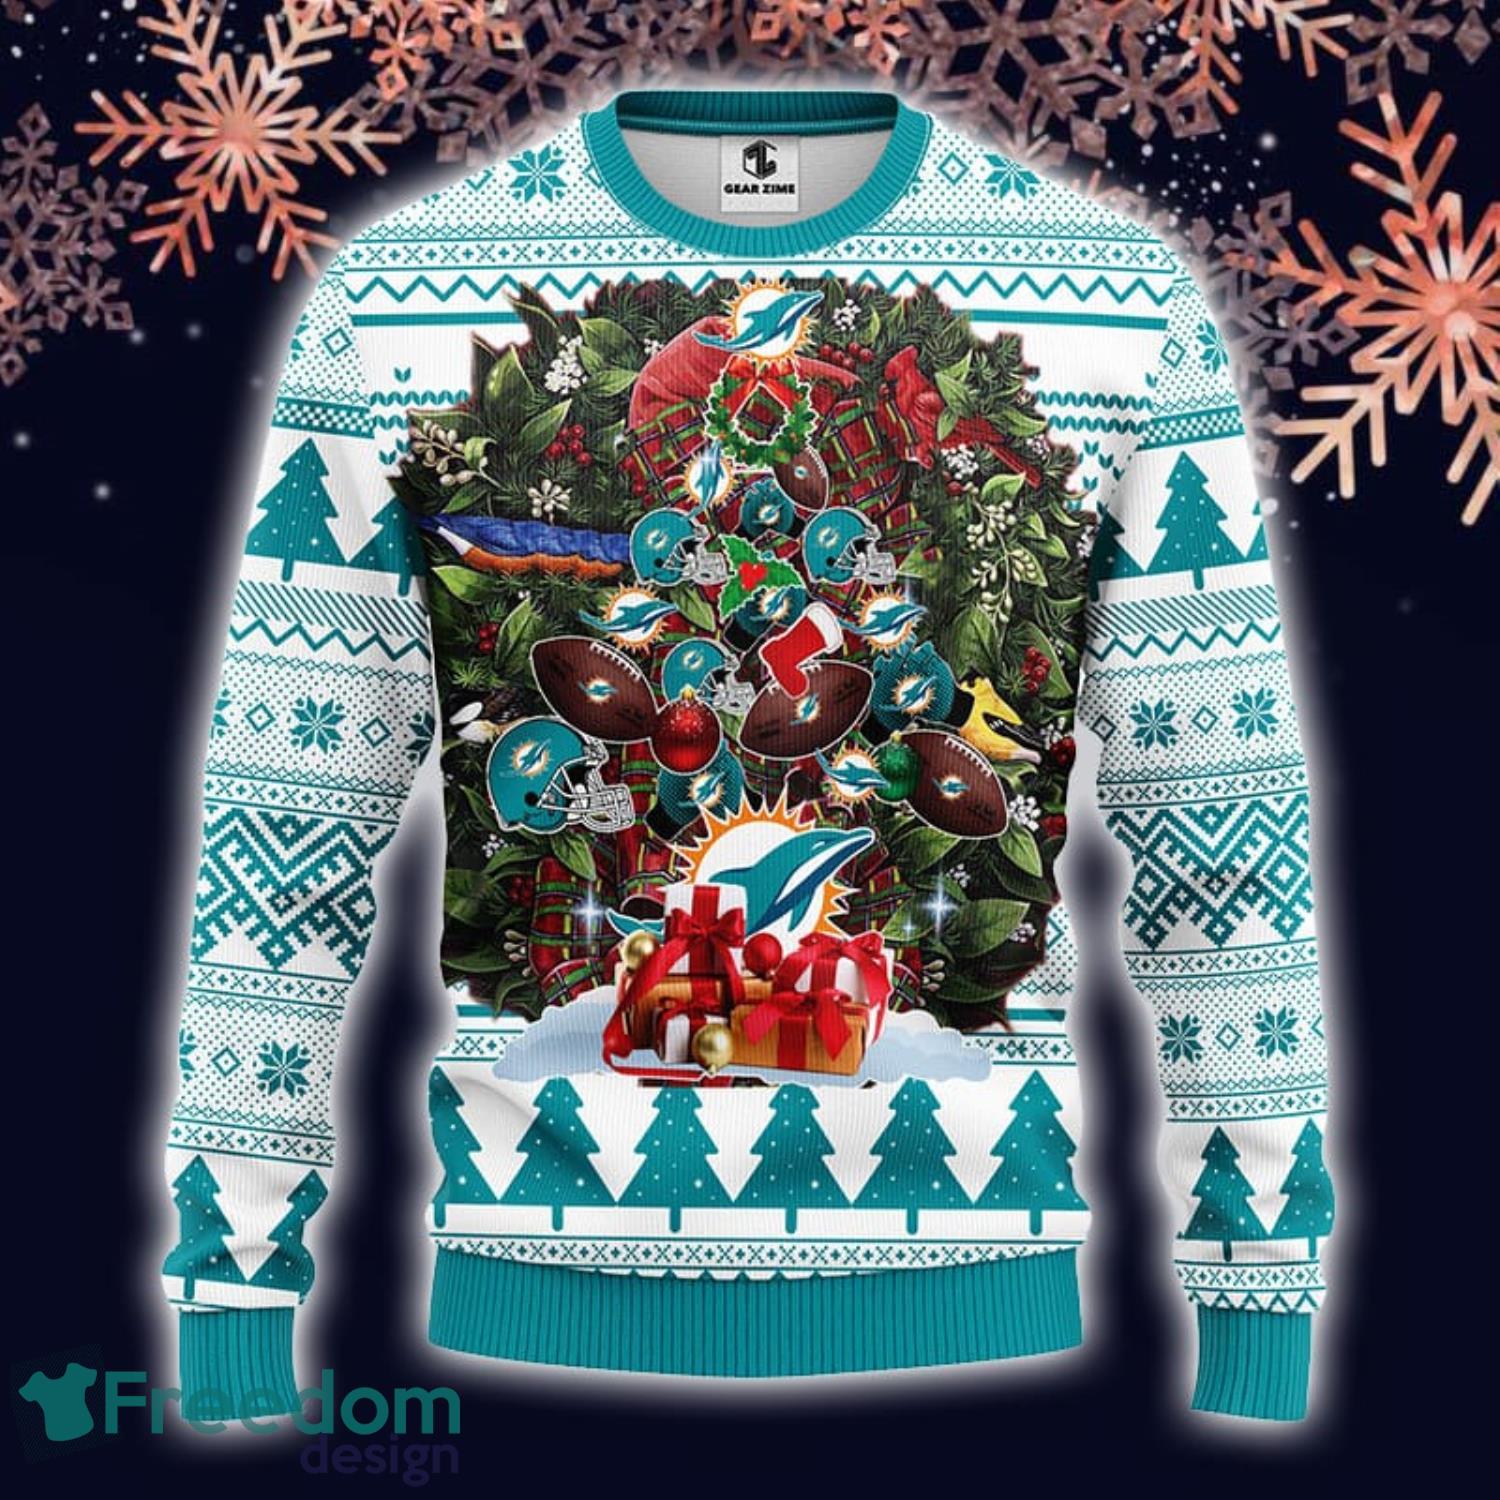 NHL Chicago Blackhawks Funny Minion Ugly Christmas Sweater For